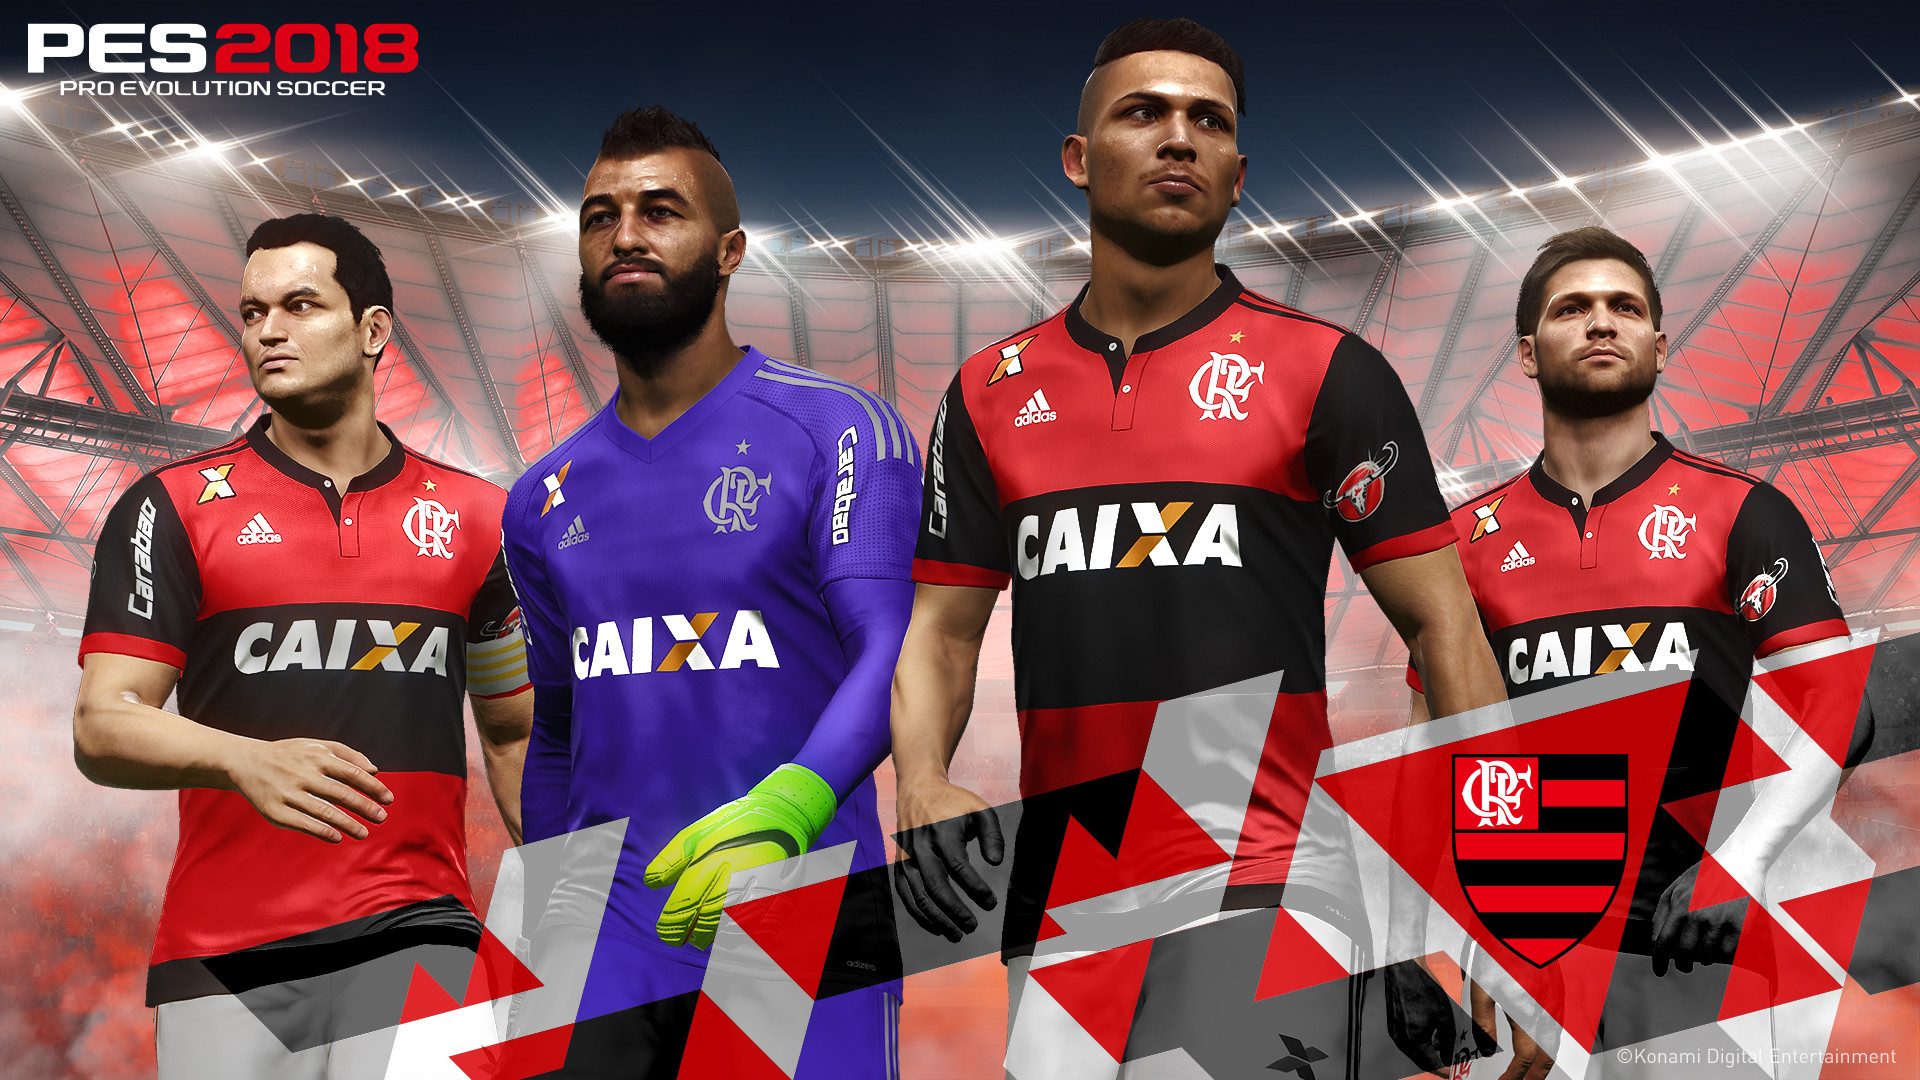 1920x1080 From Brazil, 20 teams from Serie A, the top league from Campeonato  Brasileiro of the Brazilian Football Confederation (CBF) are included.